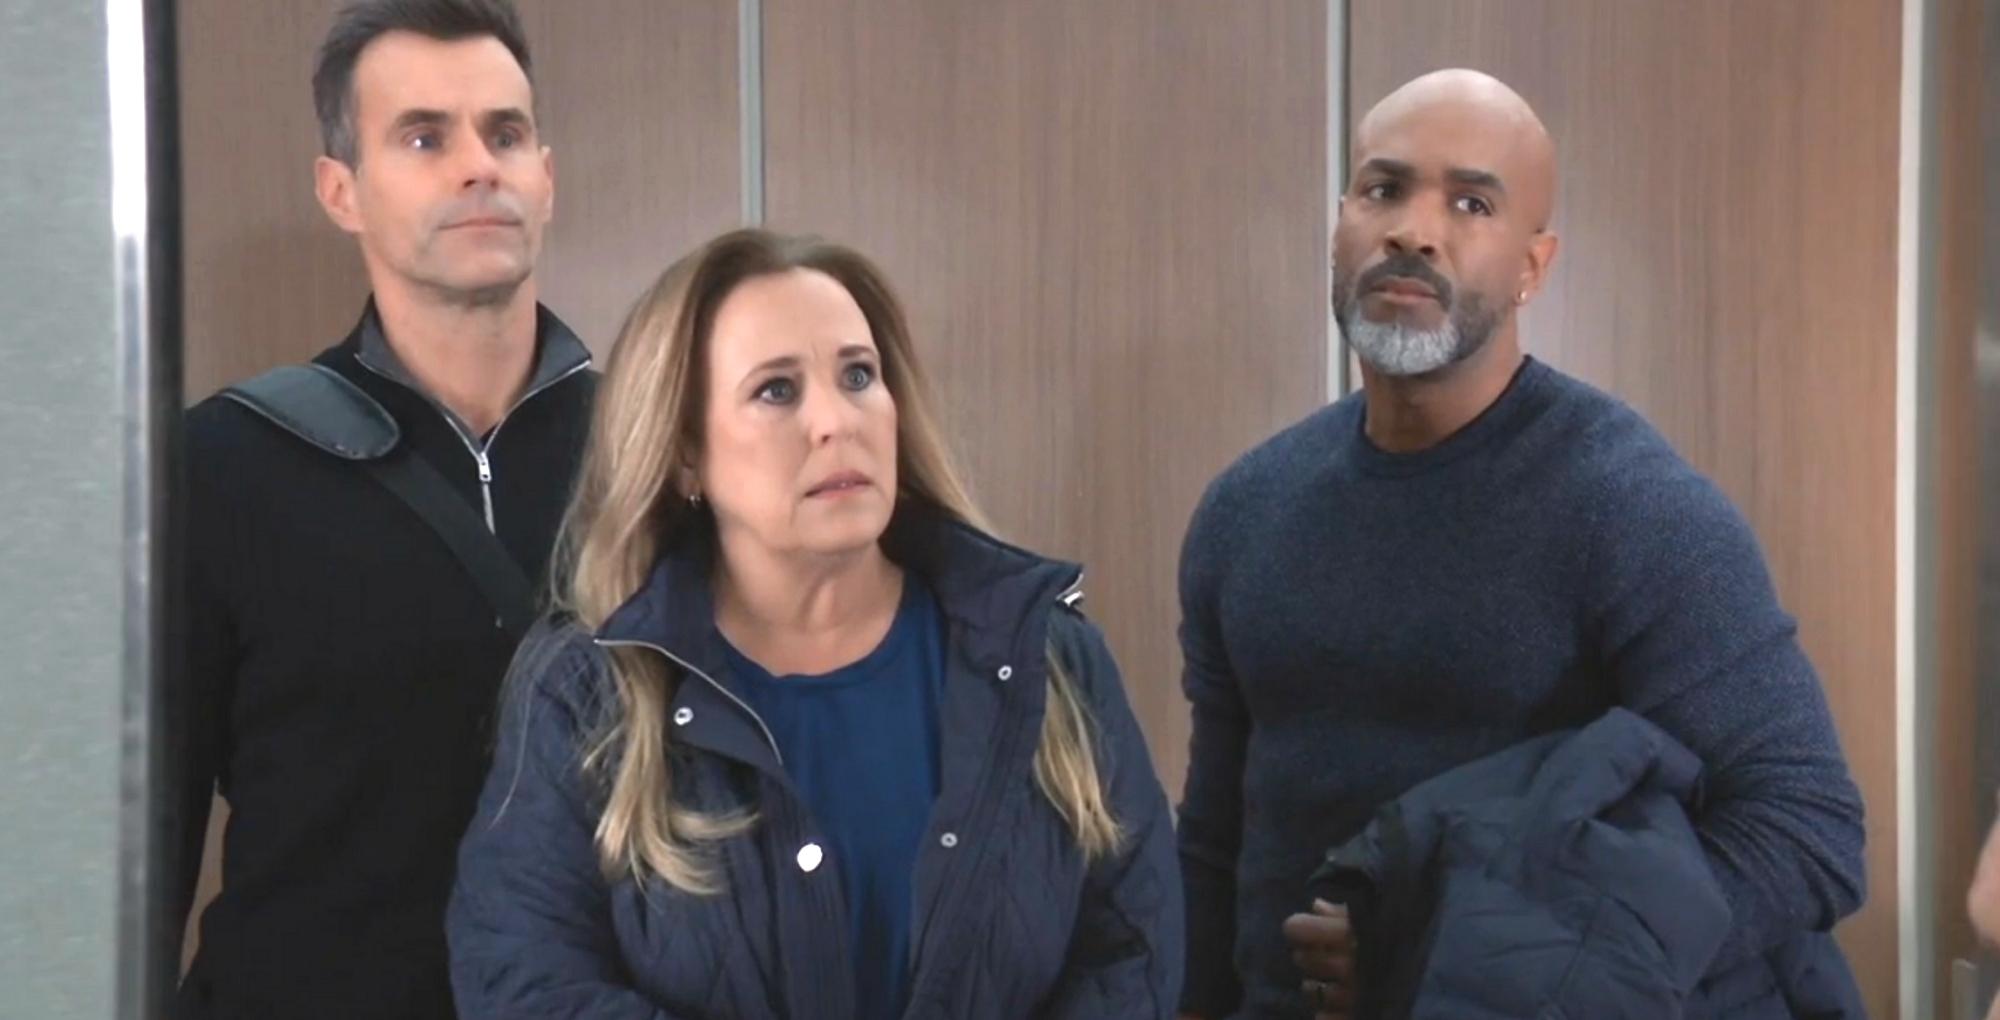 the general hospital recap for april 24 2023 has laura collins and friends getting in an elevator to get victor